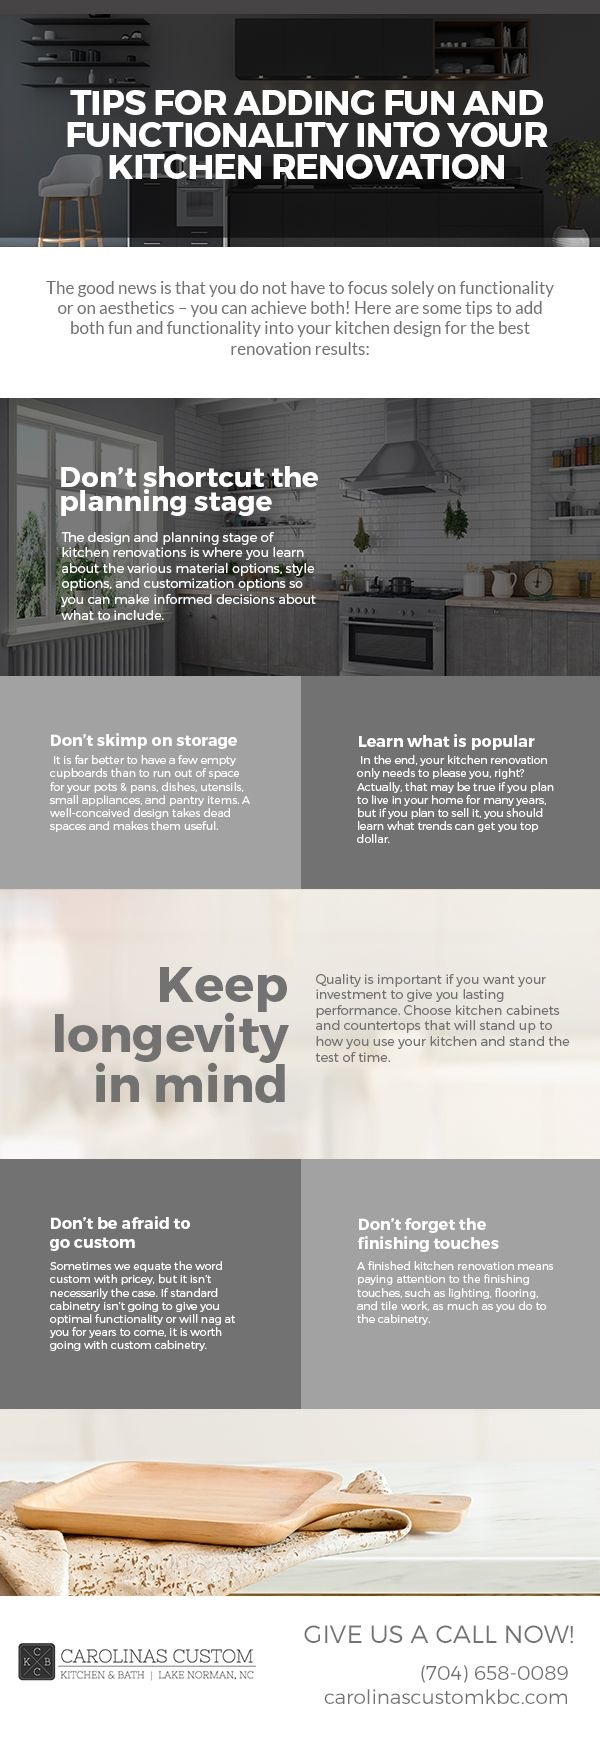 Tips for Adding Fun and Functionality into Your Kitchen Renovation [infographic]